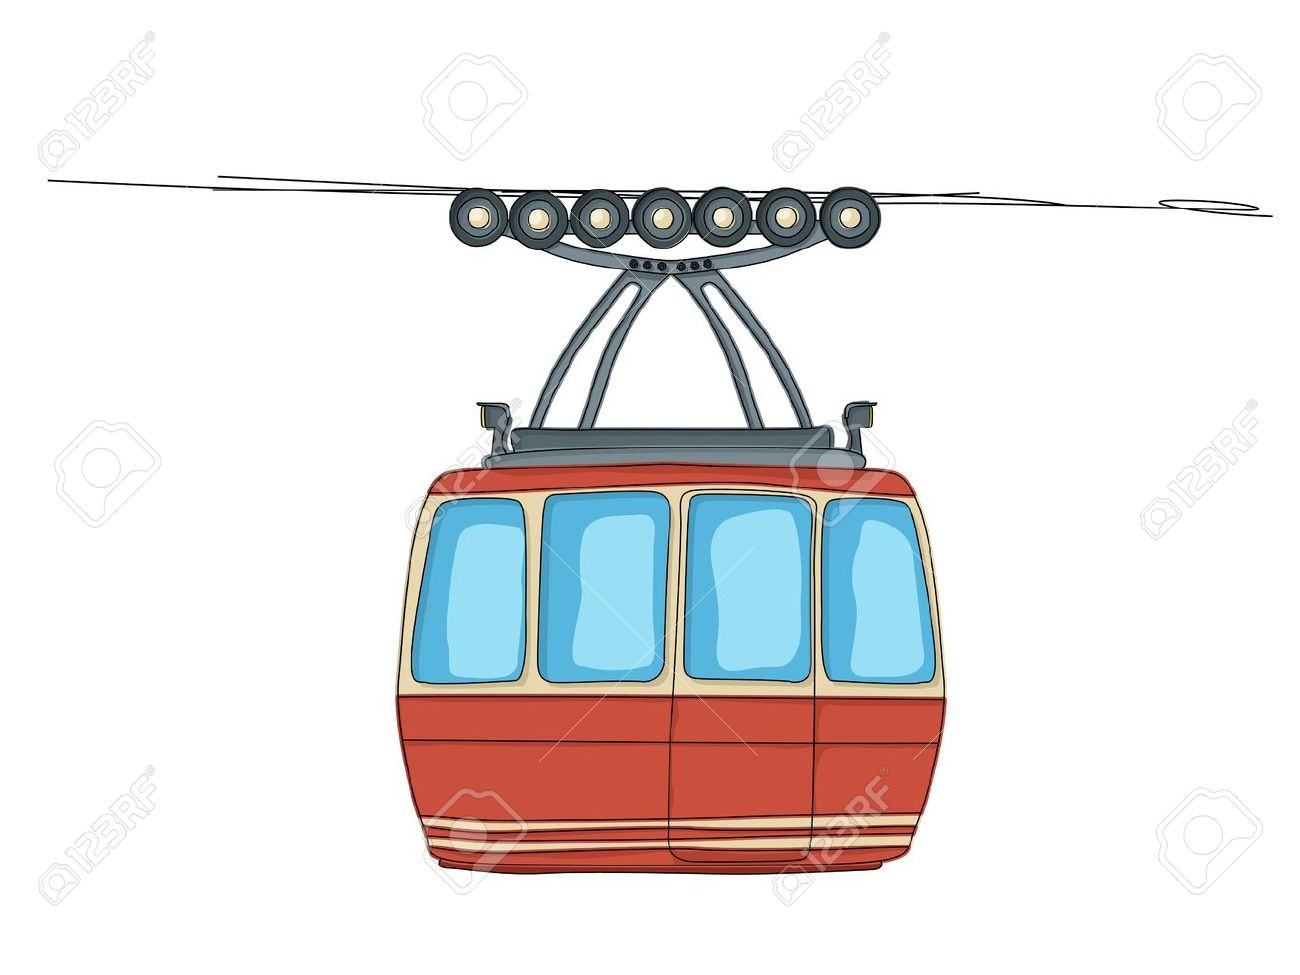 Cable Car Images & Stock Pictures. Royalty Free Cable Car Photos.